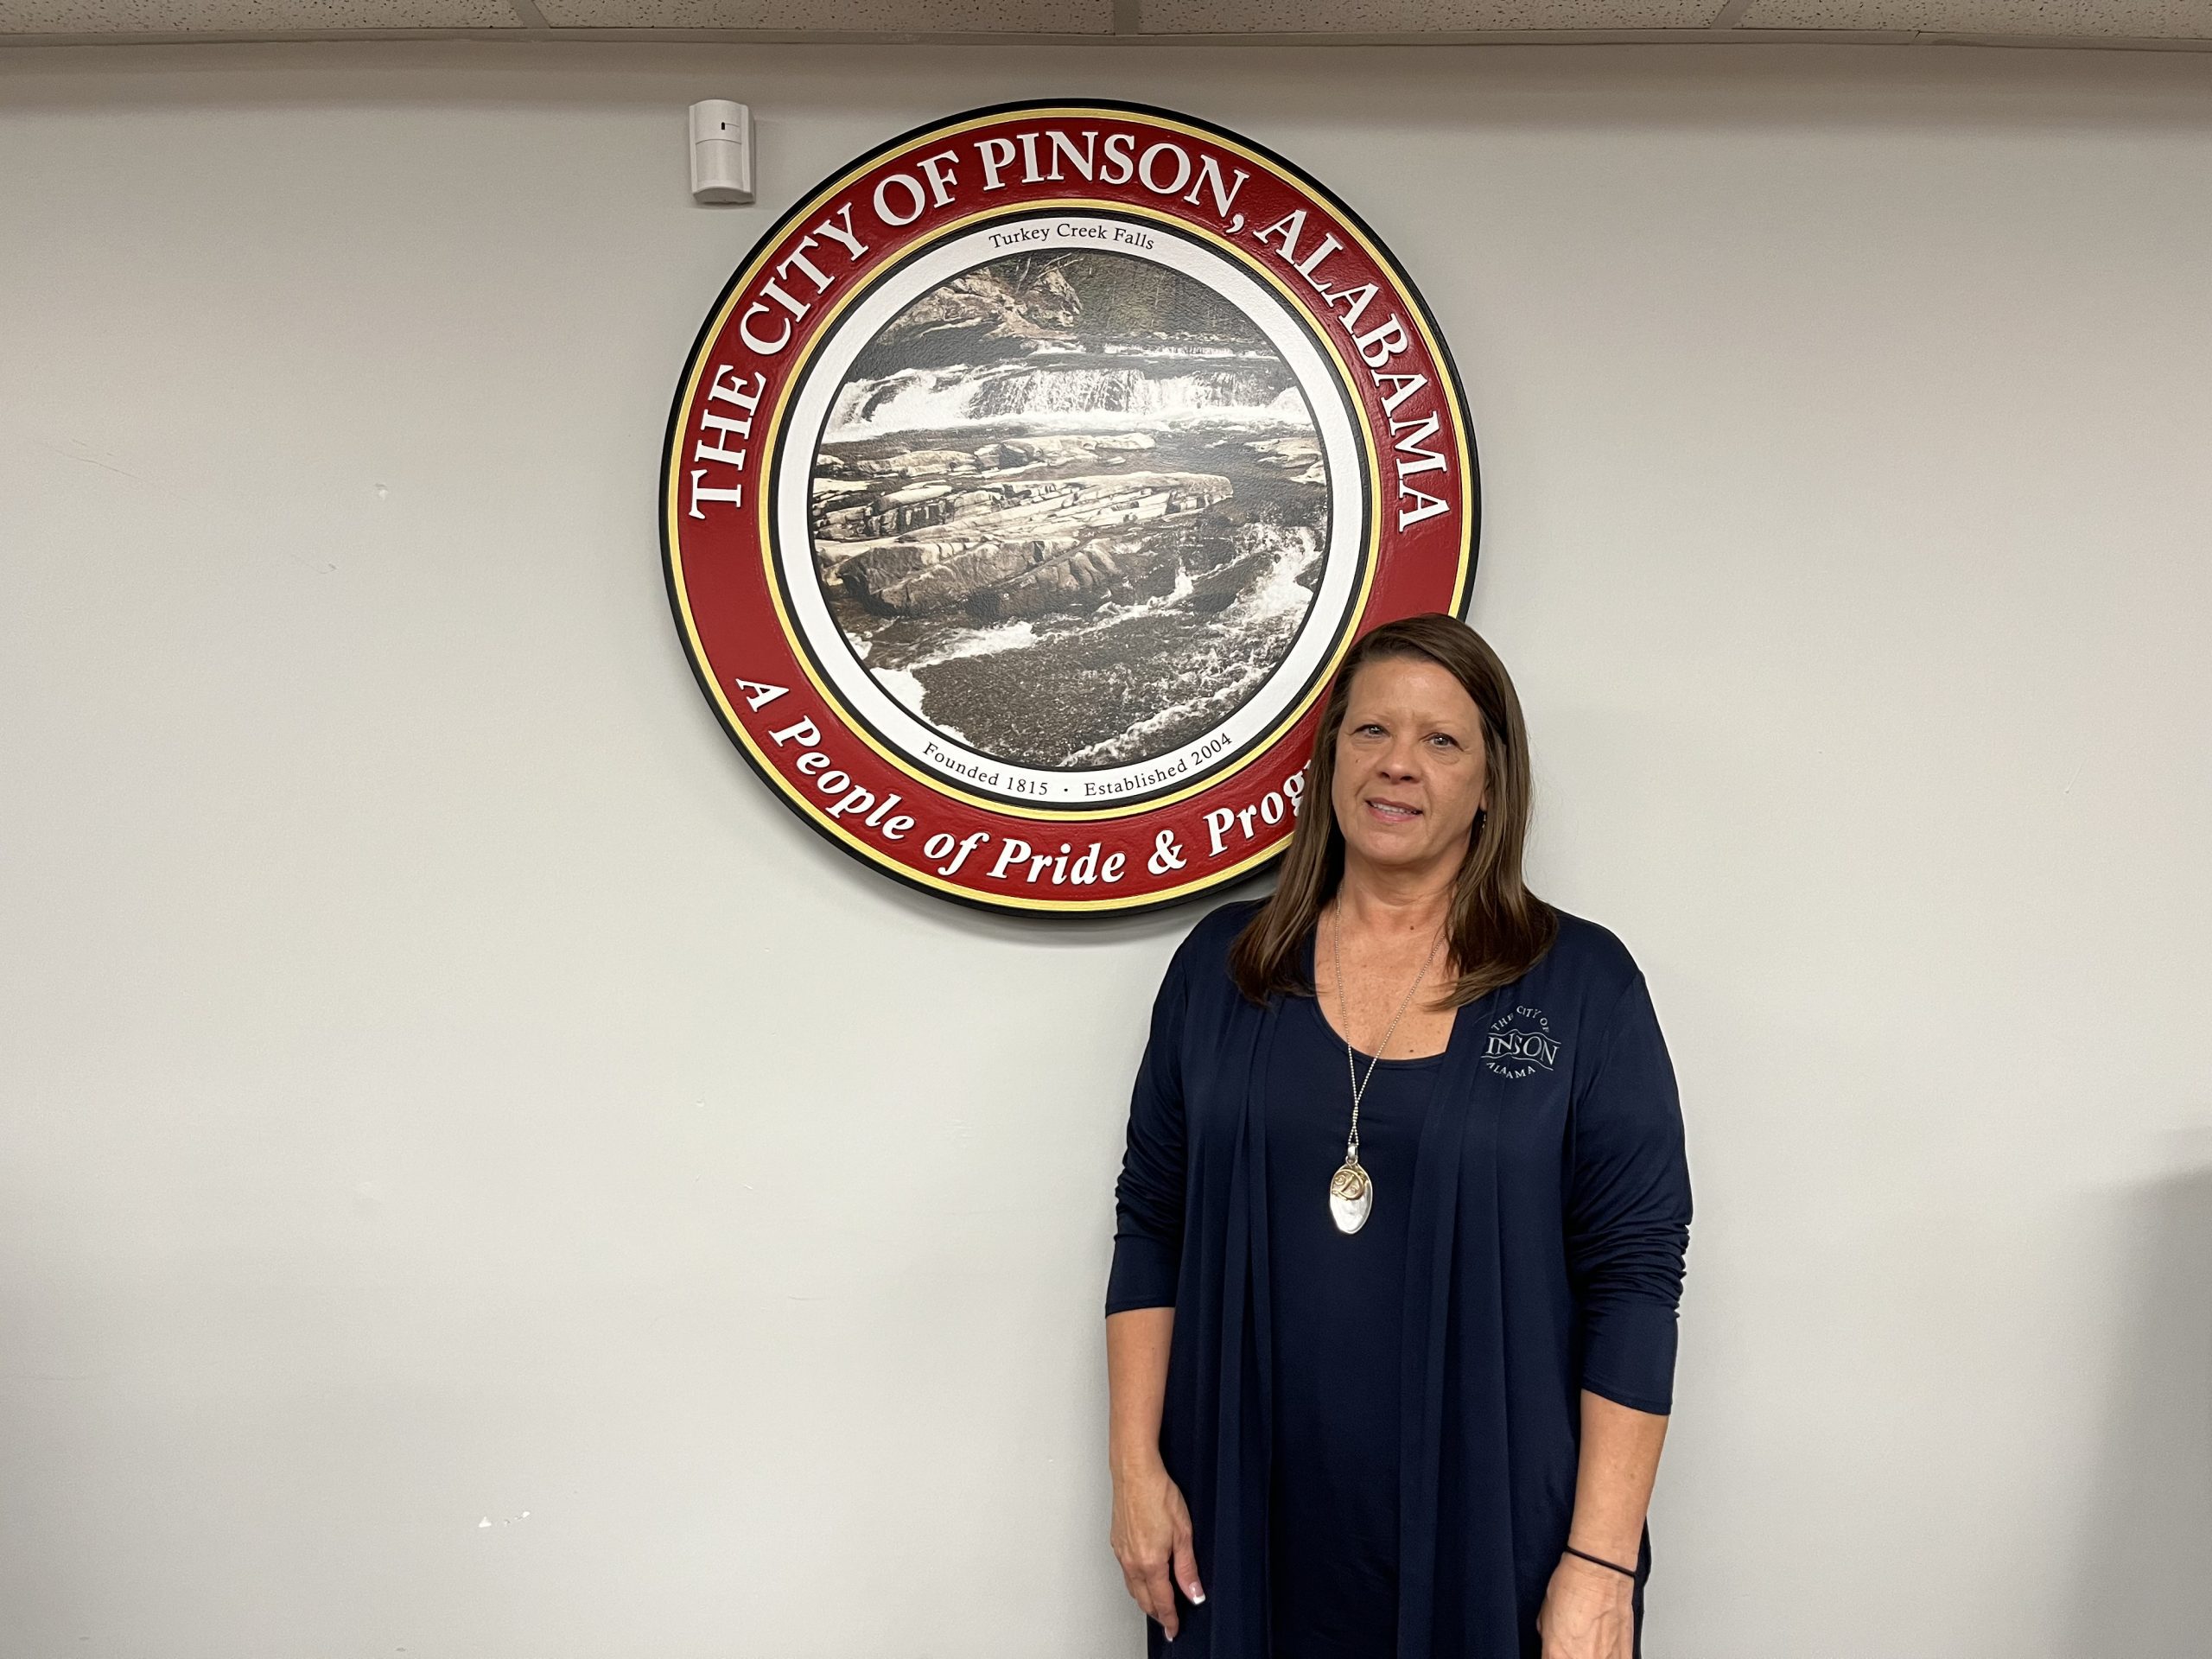 Pinson Councilor Dawn Tanner resigns after 18+ years of service